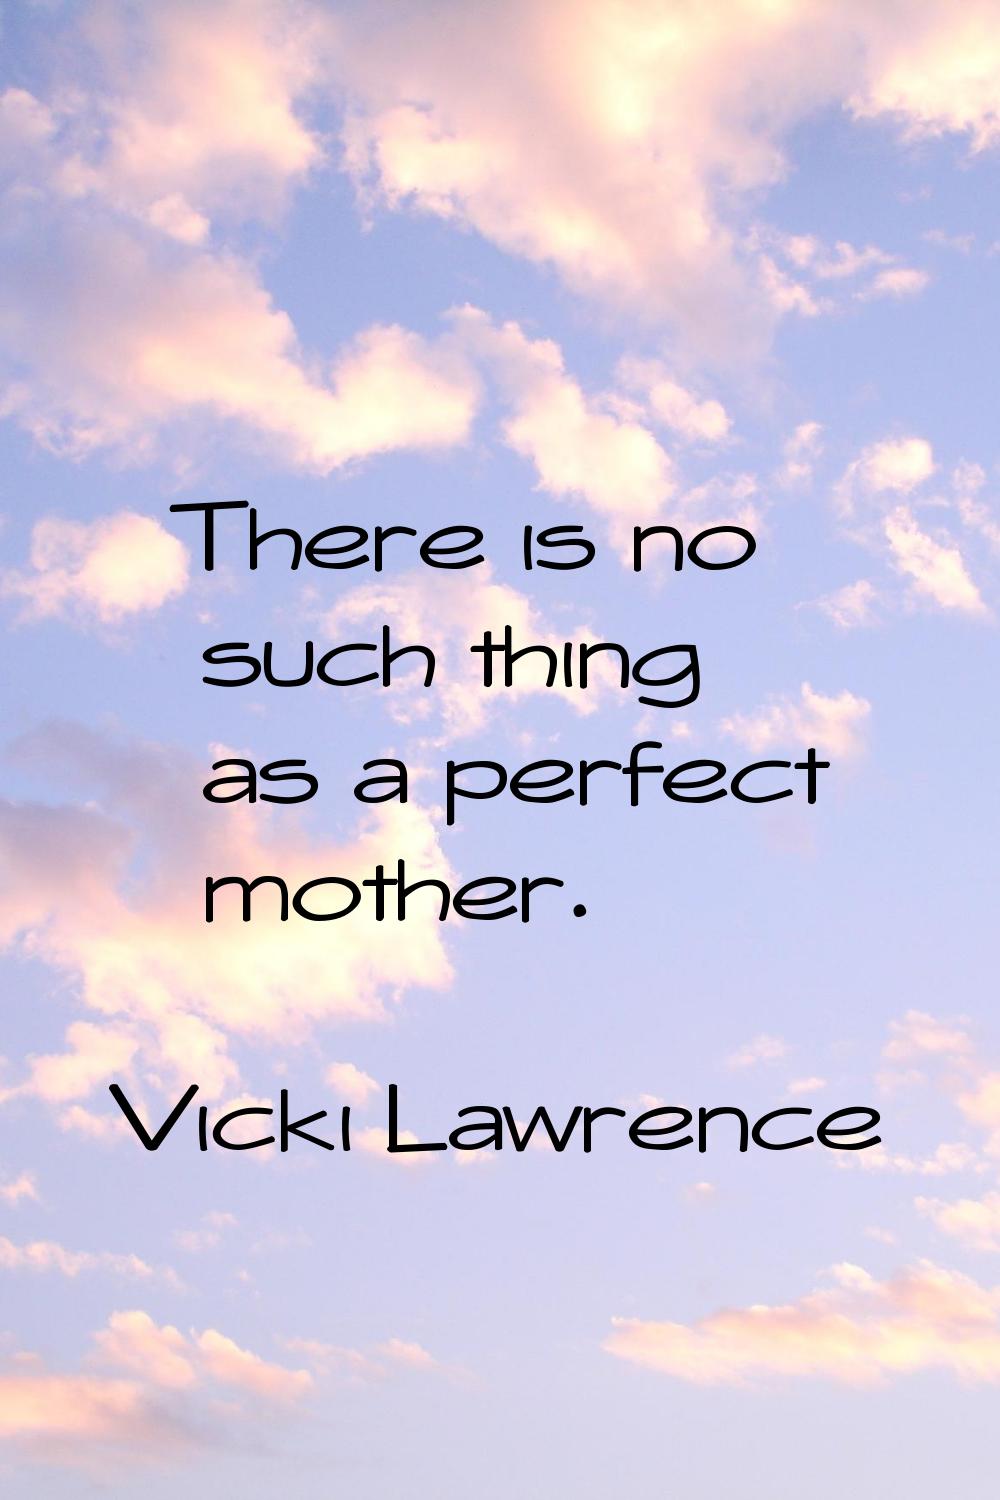 There is no such thing as a perfect mother.